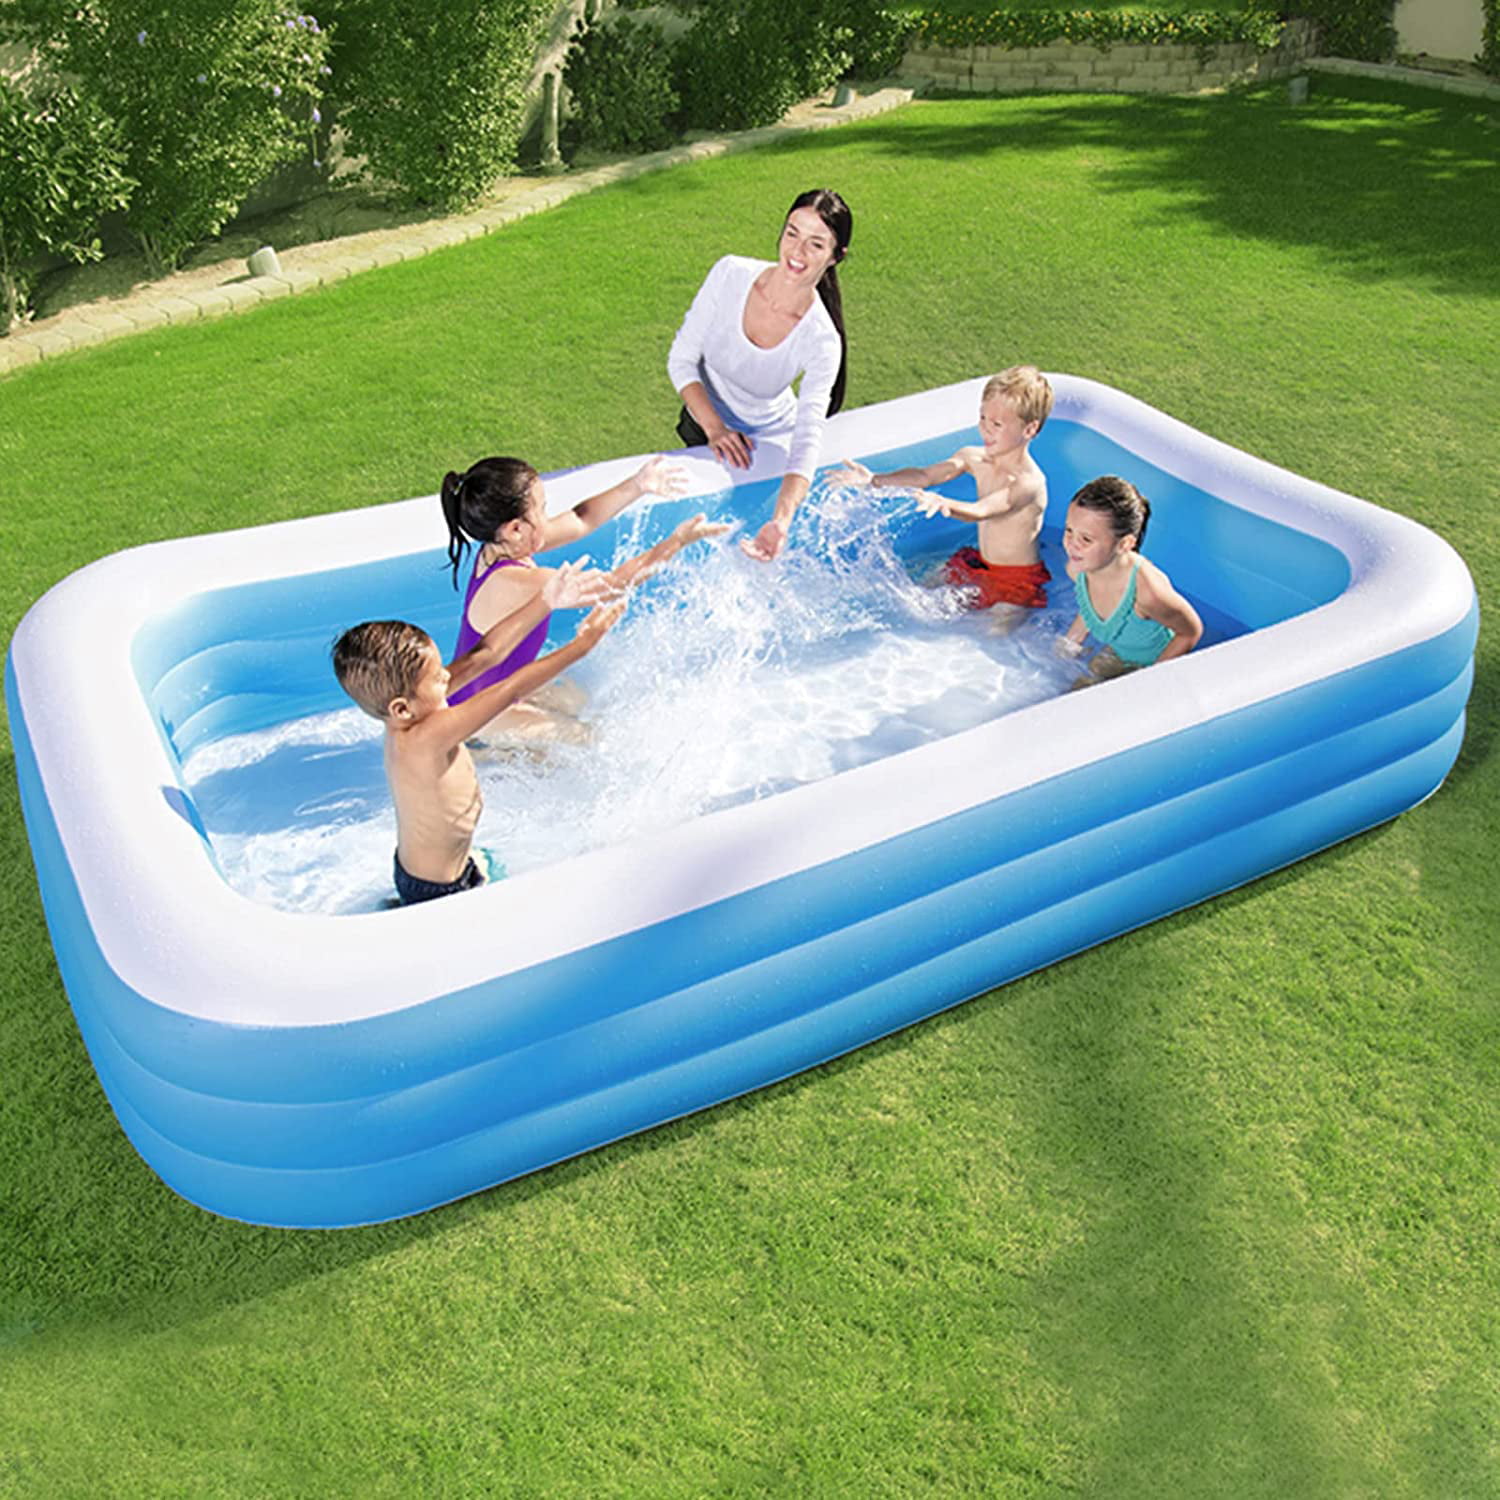 3Layer Inflatable Swimming Pool Family Kid Adult Water Play Fun Backyard 12.5FT 